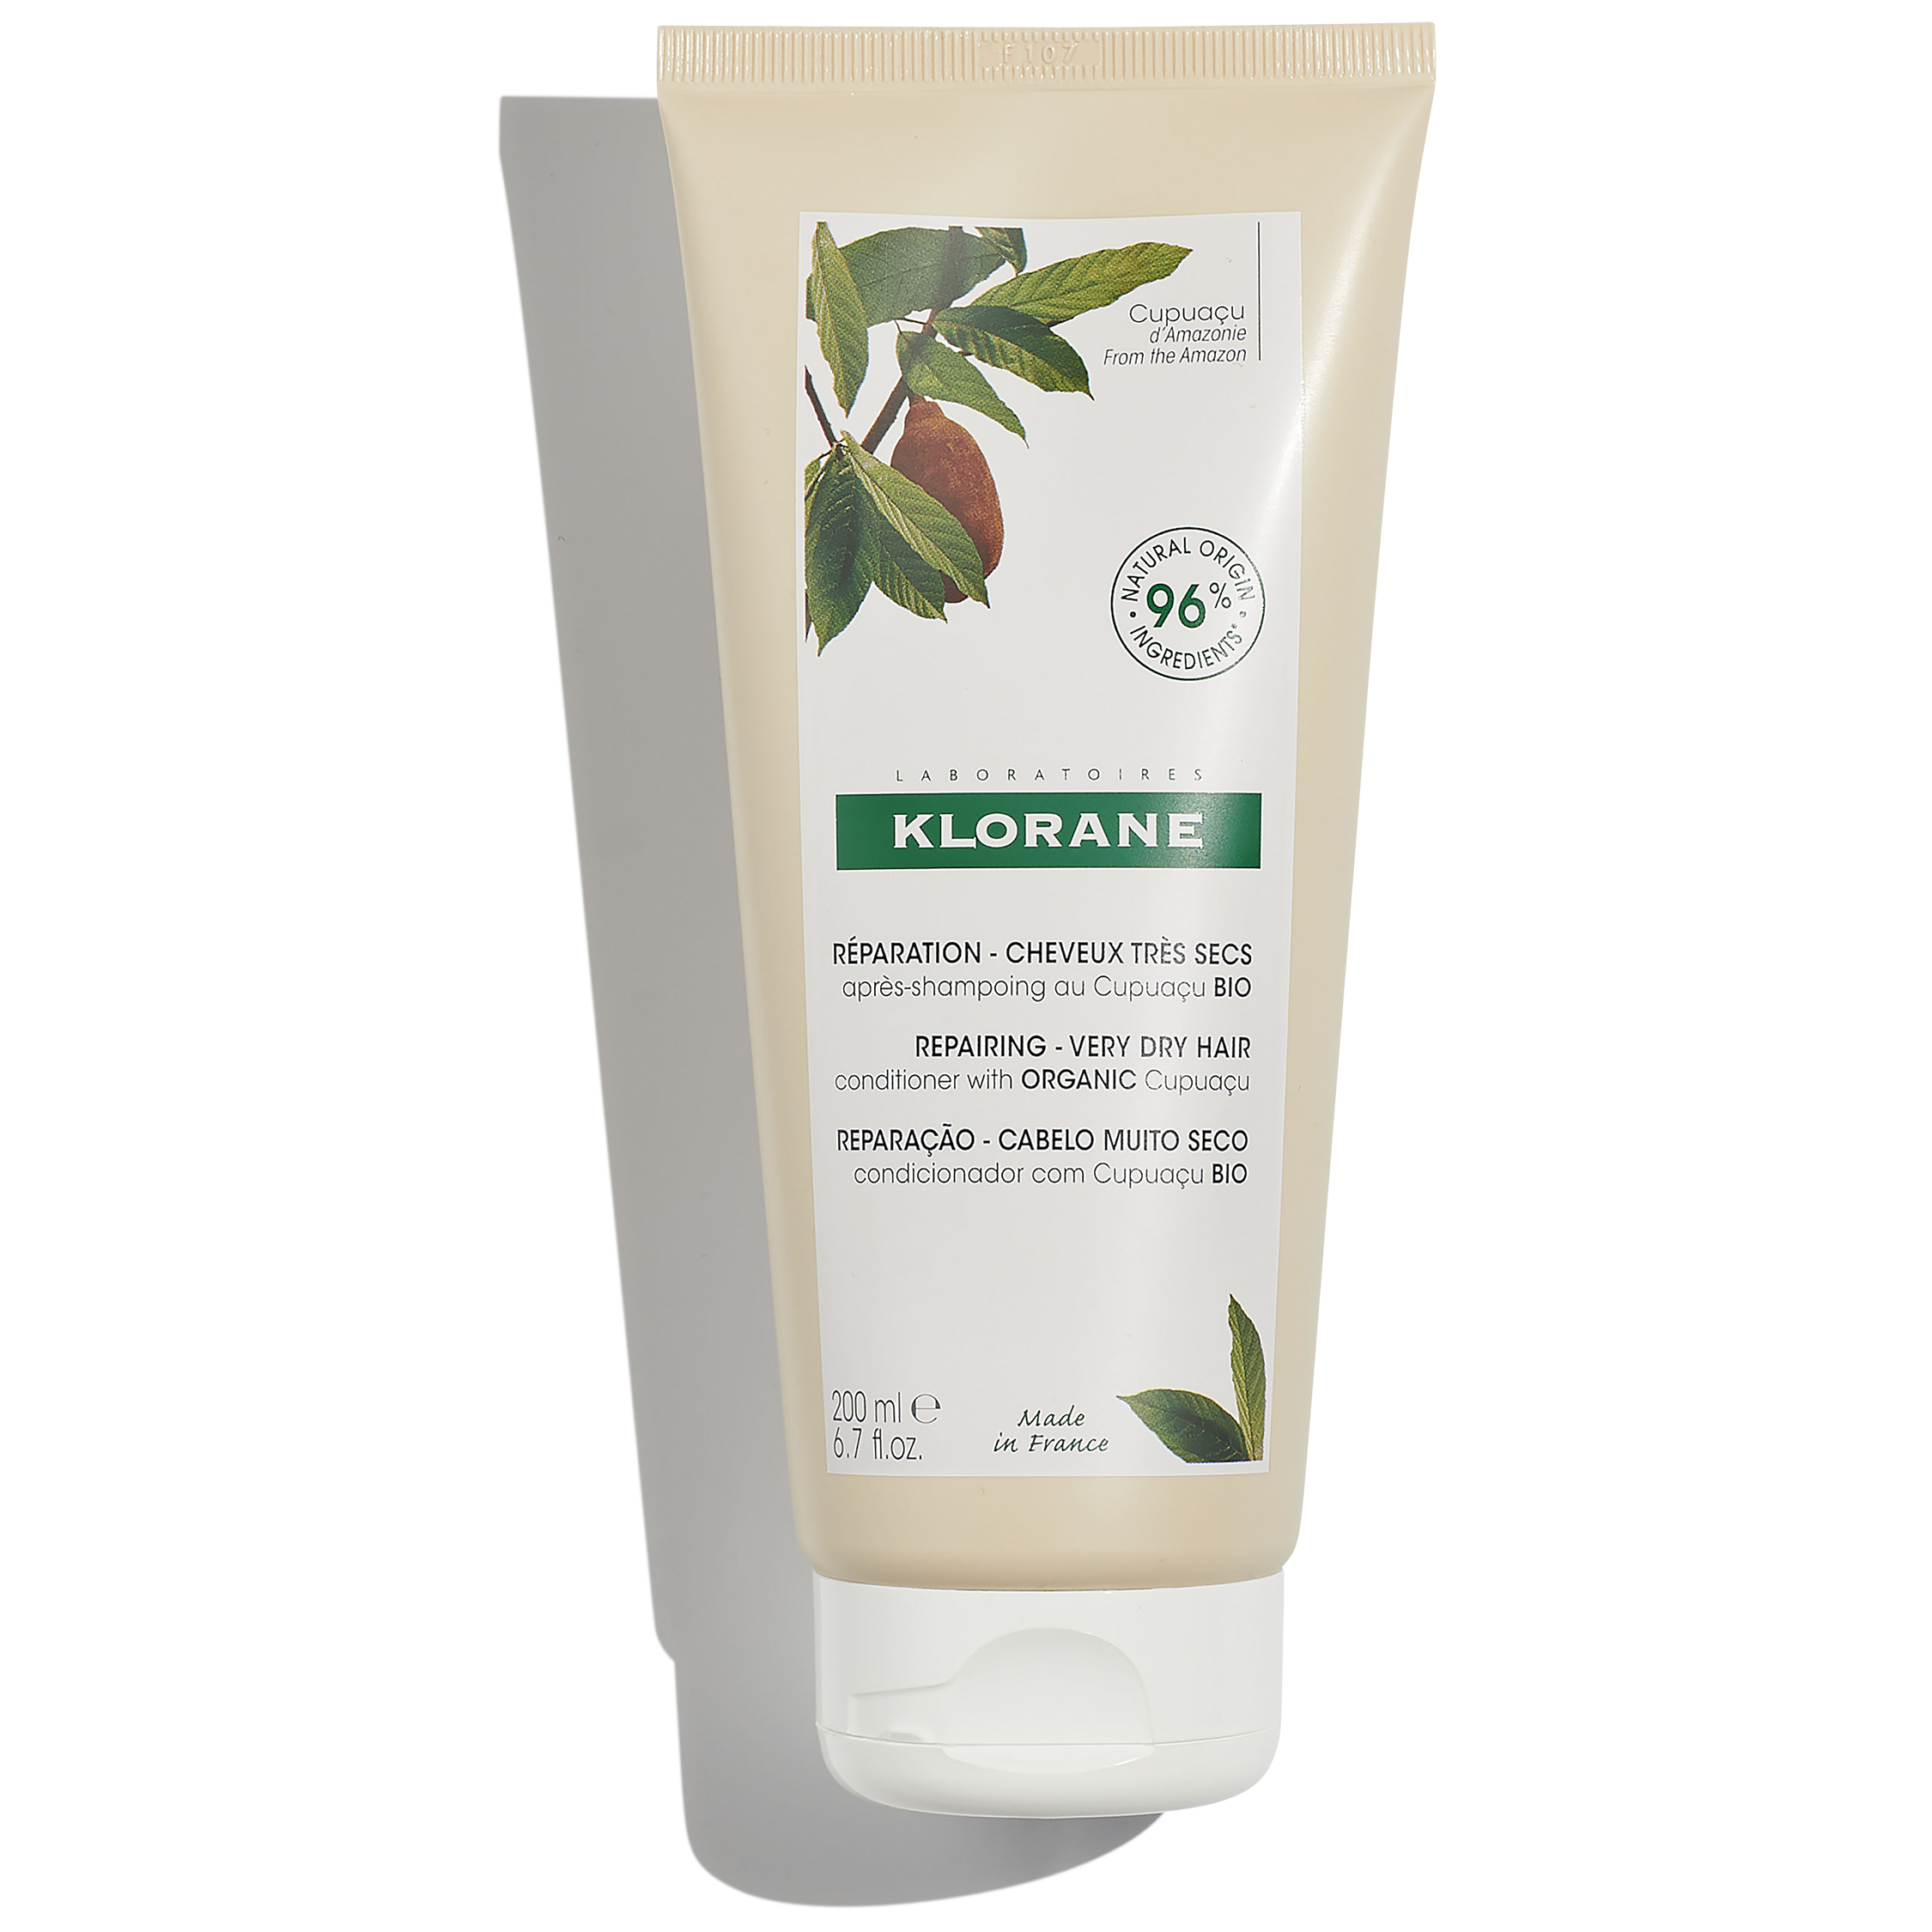 ; Klorane Nourishing and Repairing Conditioner with Organic Cupuacu butter €13.50